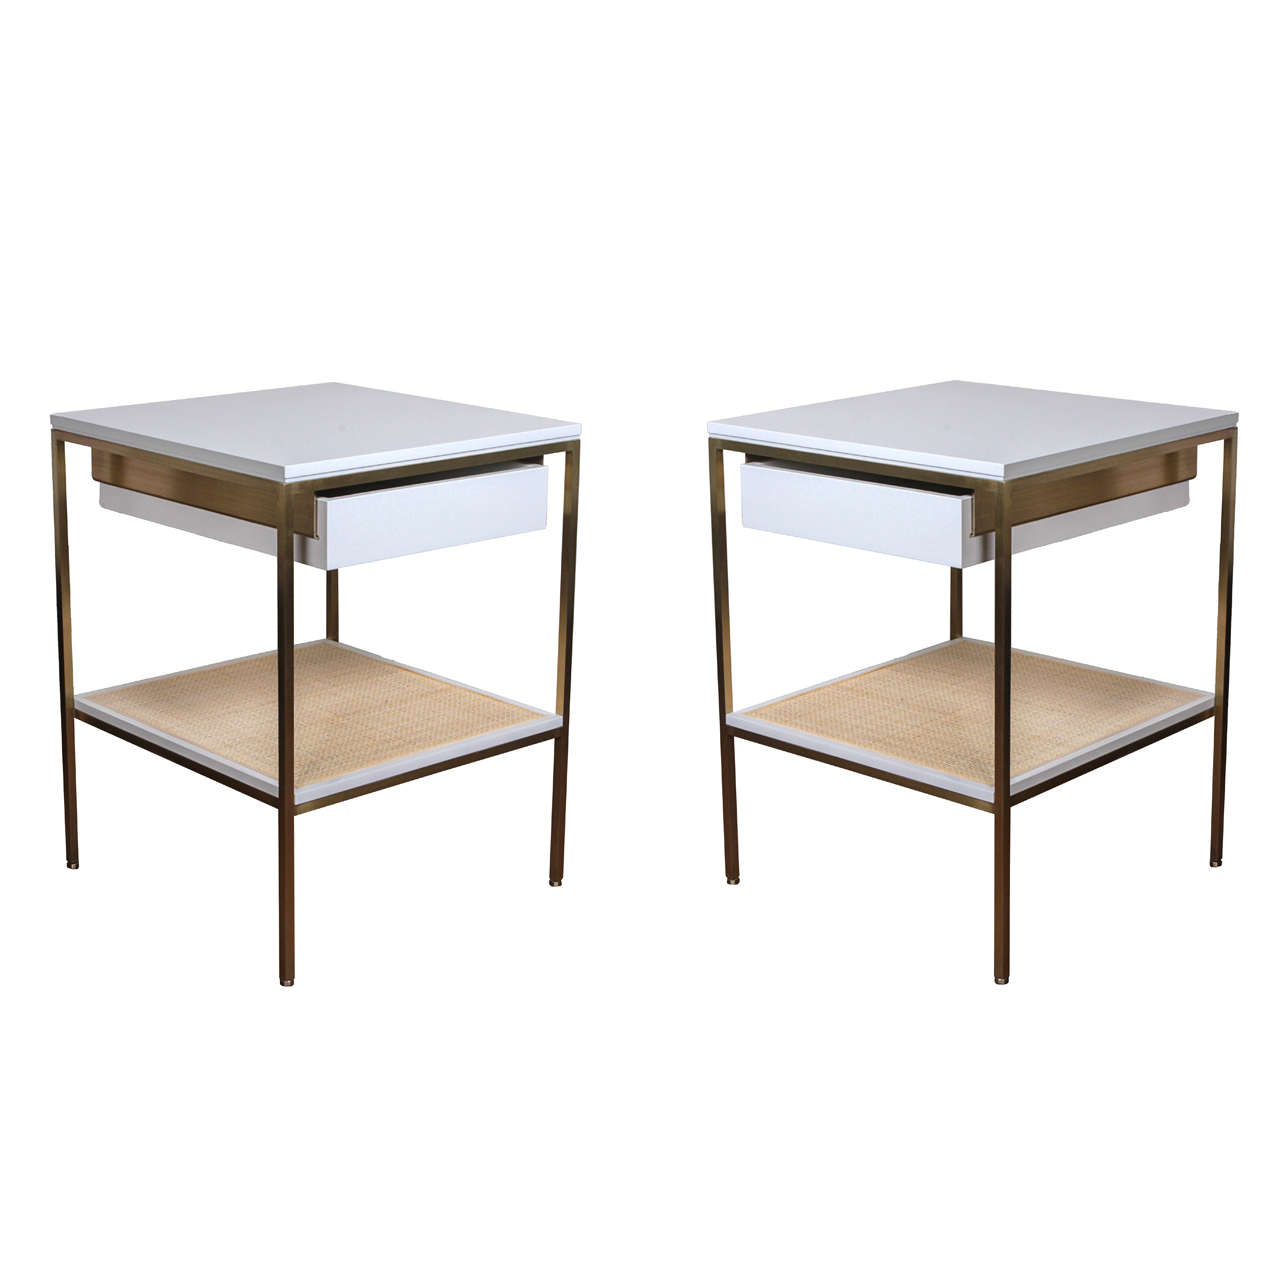 re: 392 Bedside Tables in Soft Chamois gloss on satin brass frames. For Sale